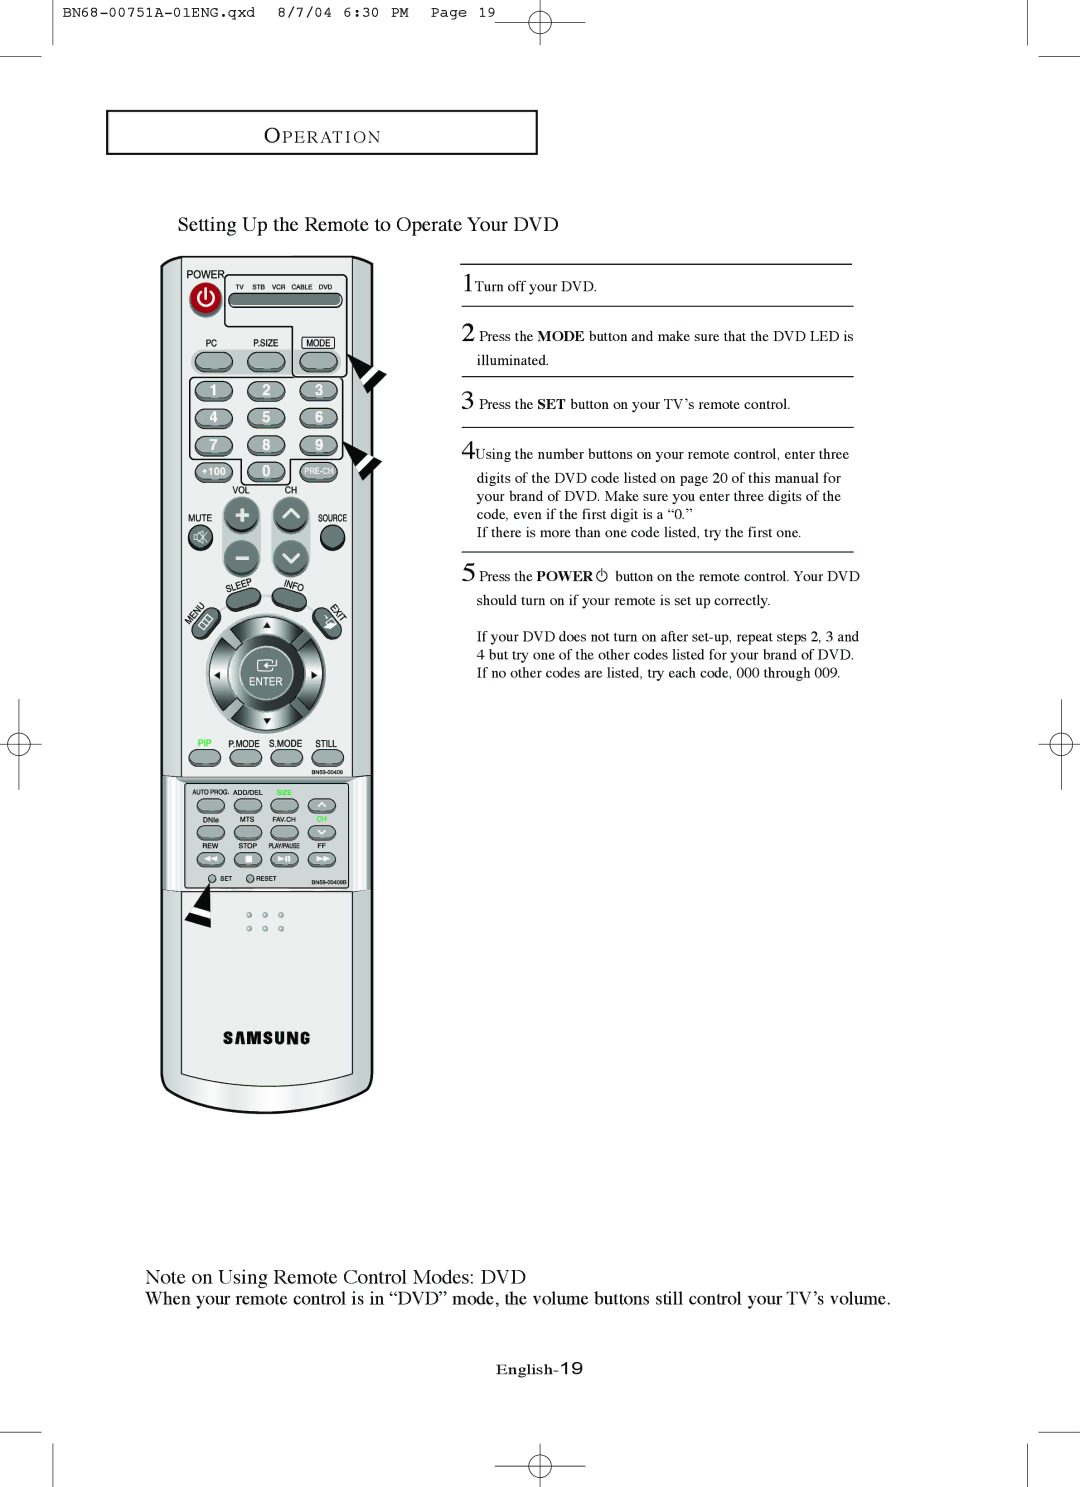 Samsung LN-P267W, LN-P327W manual Setting Up the Remote to Operate Your DVD 